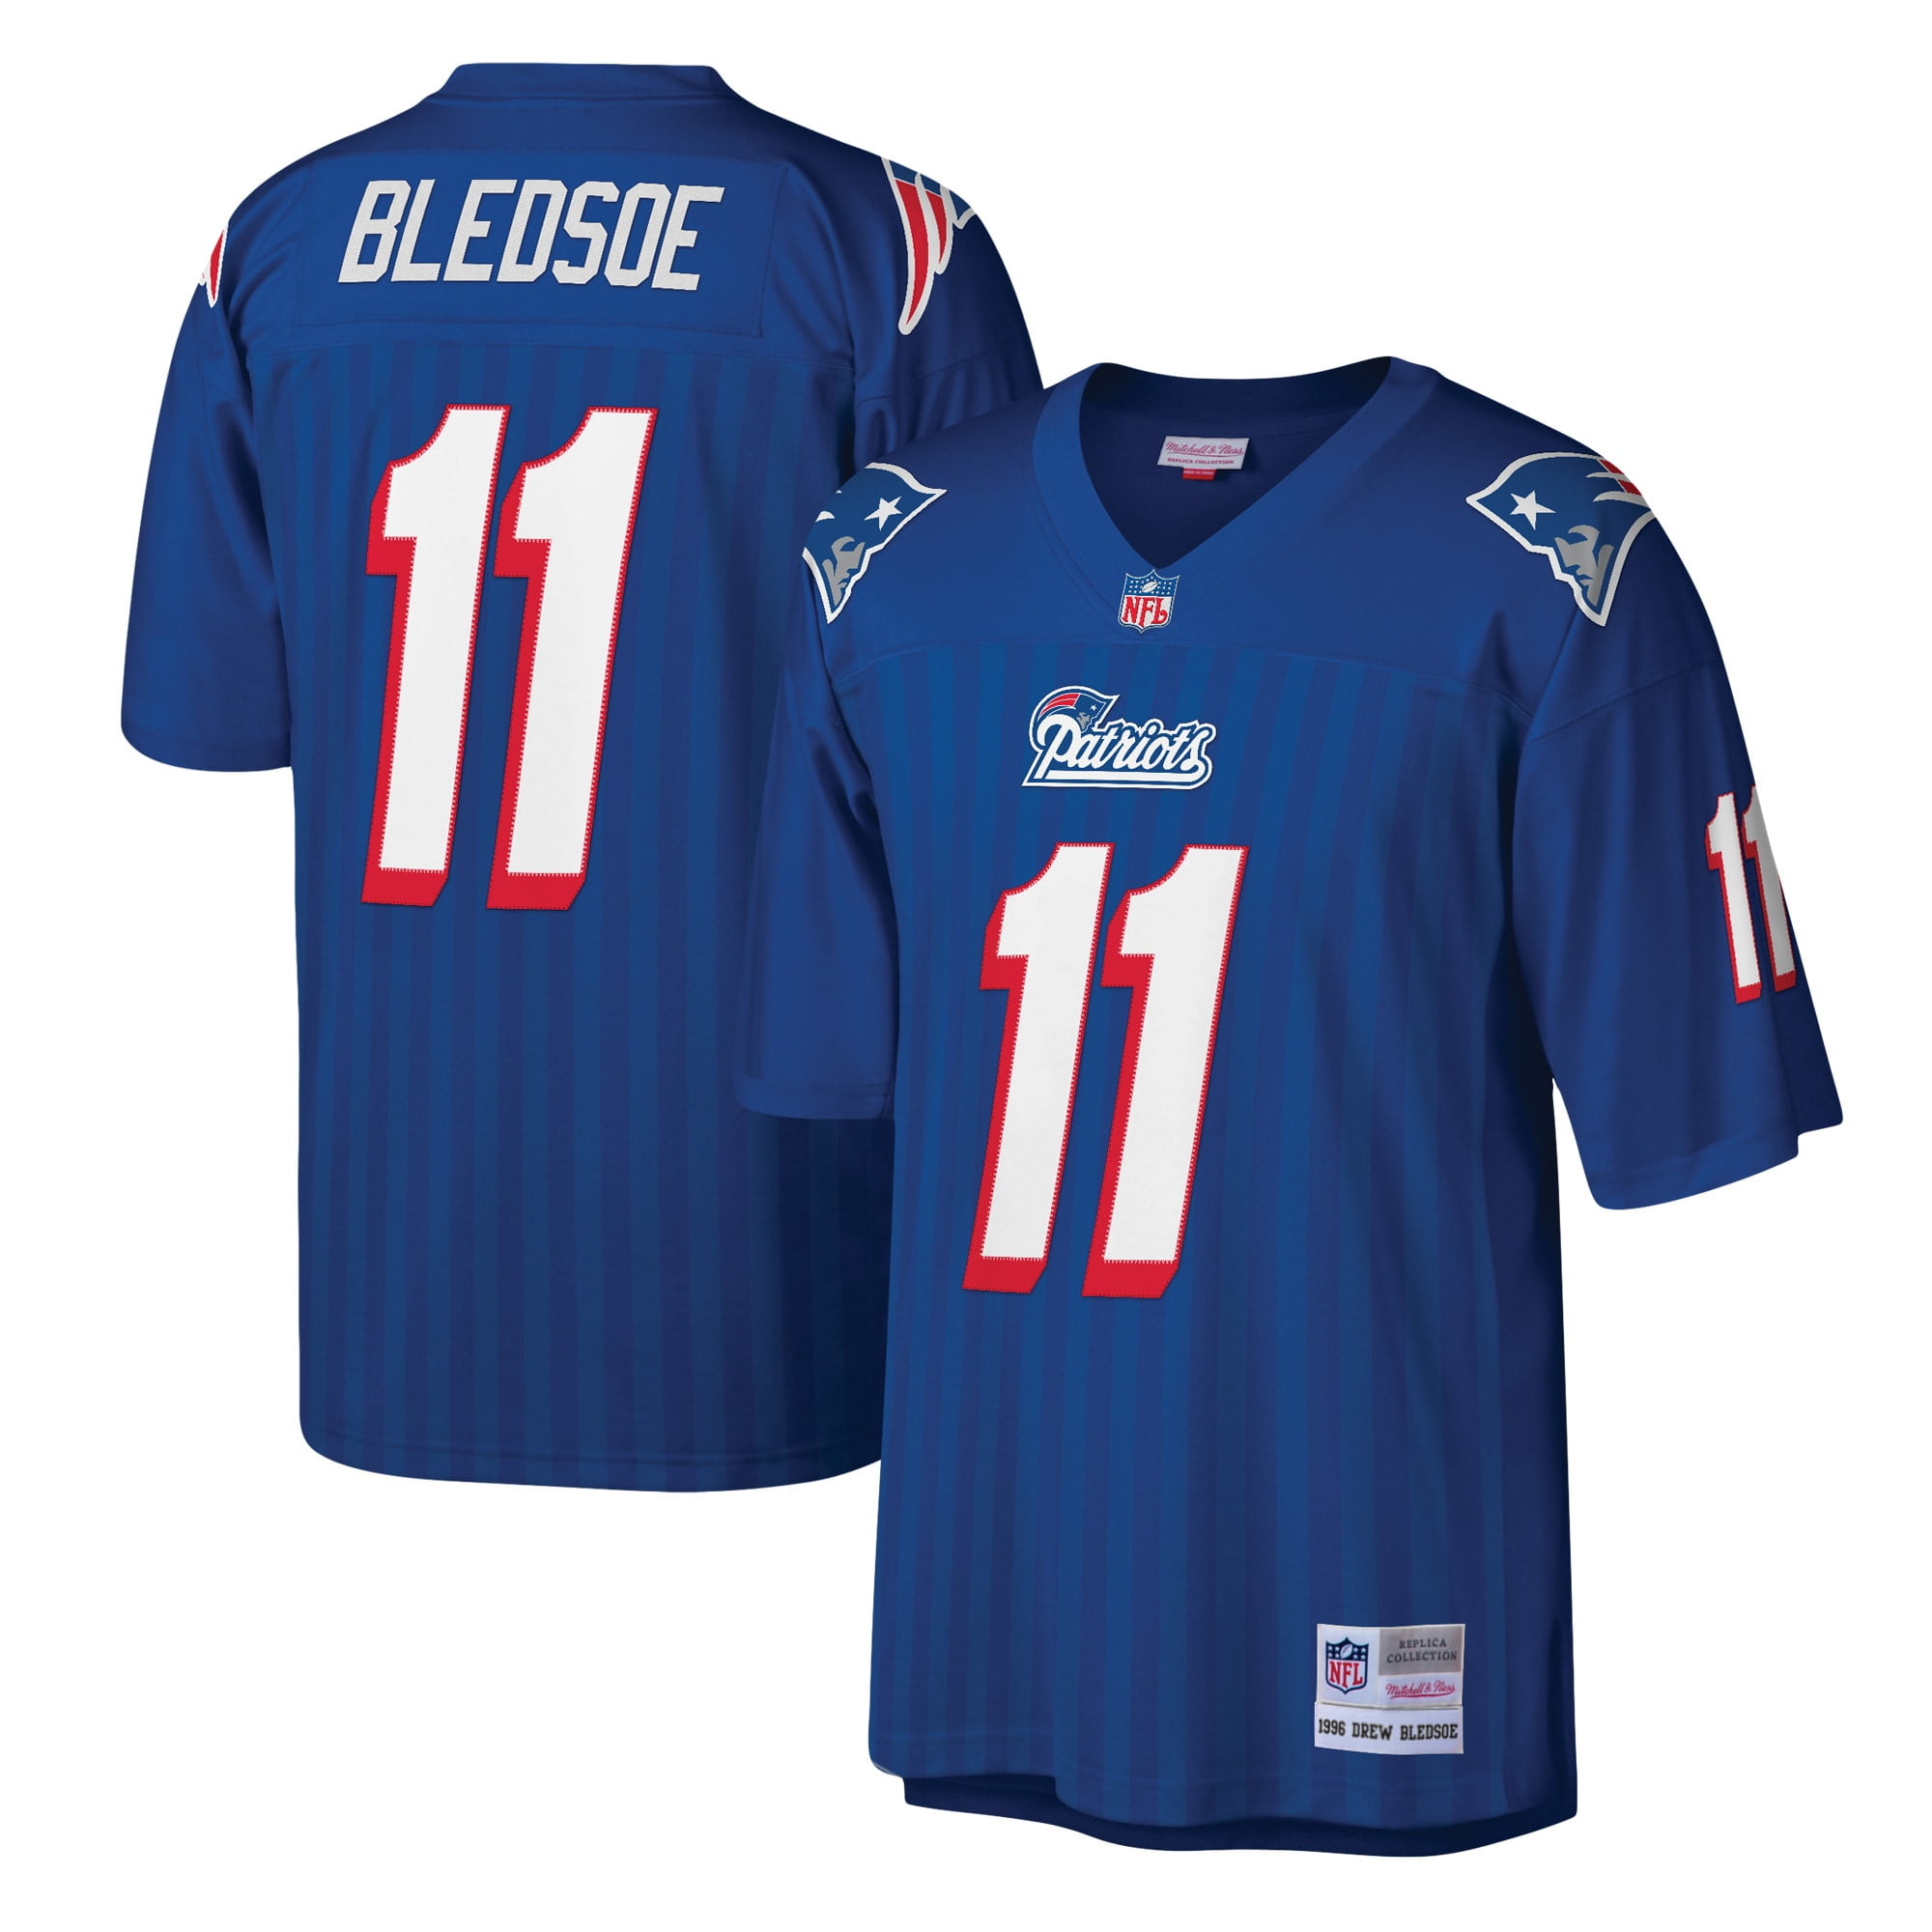 where can i buy cheap authentic nfl jerseys